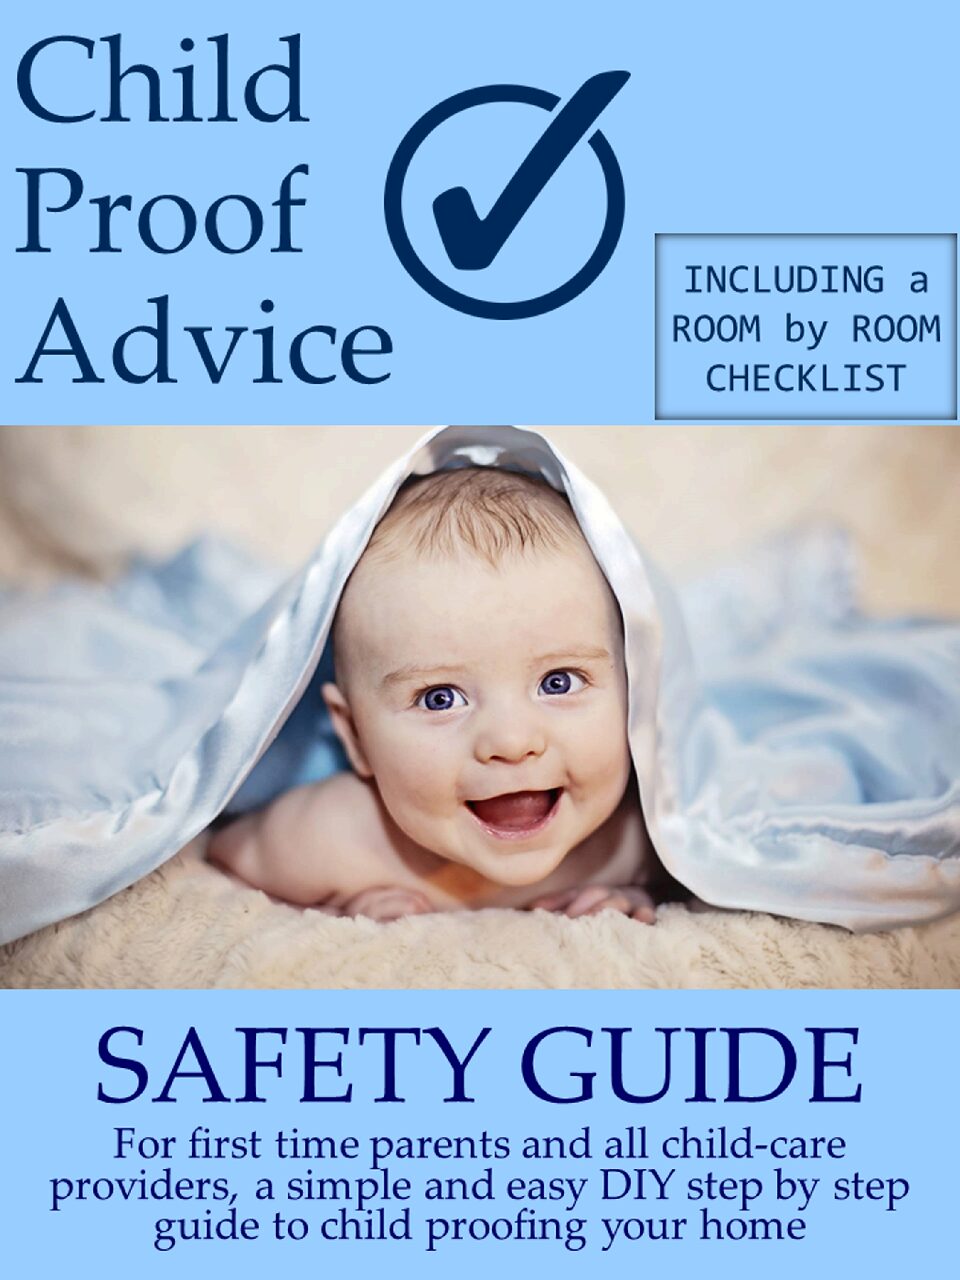 How should I baby-proof or child-proof my home?